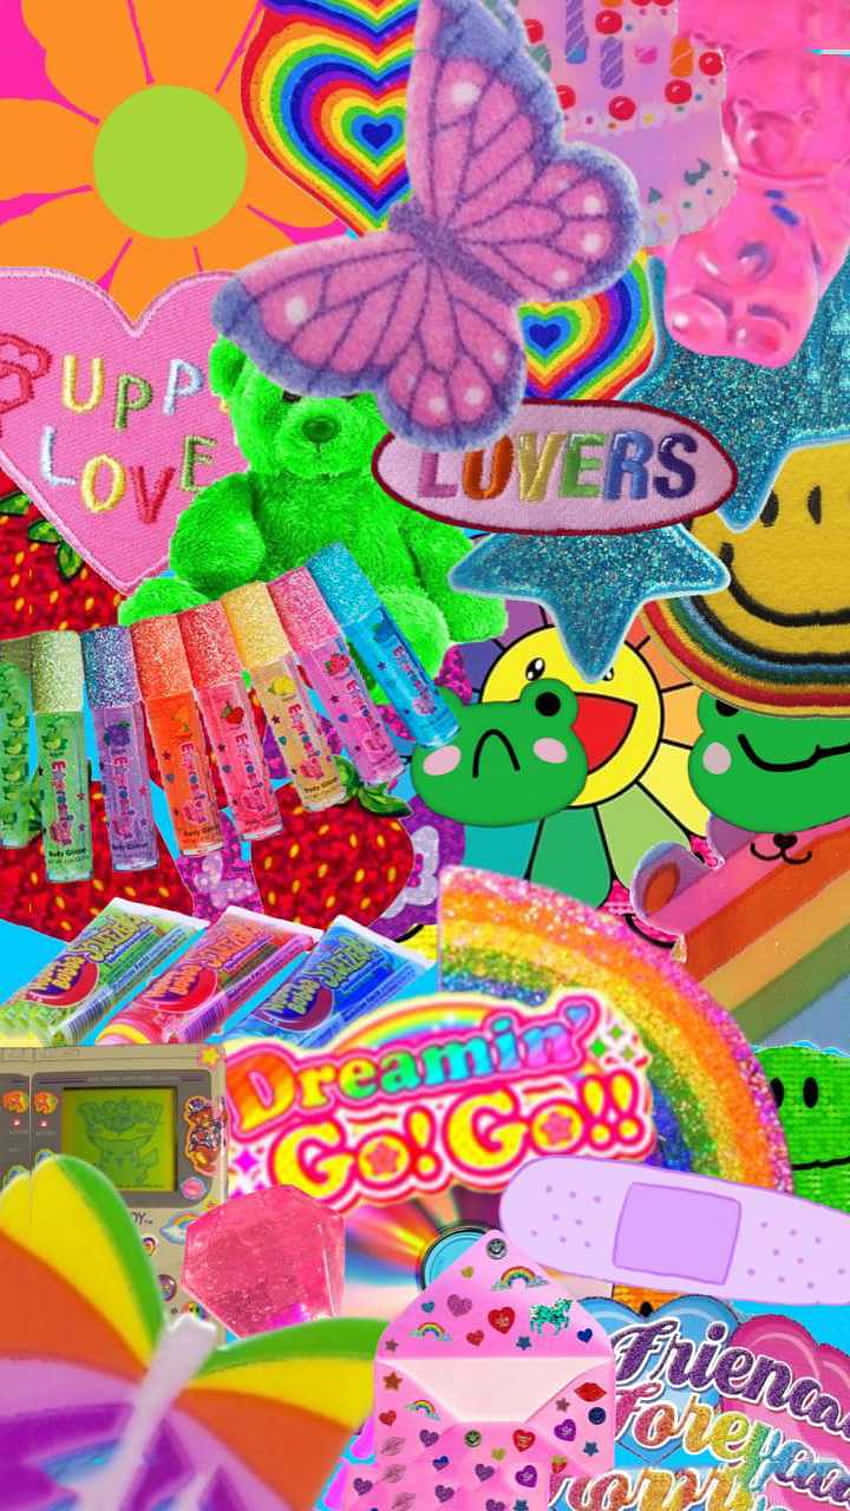 Weirdcore Pfp Of Colorful Objects Wallpaper